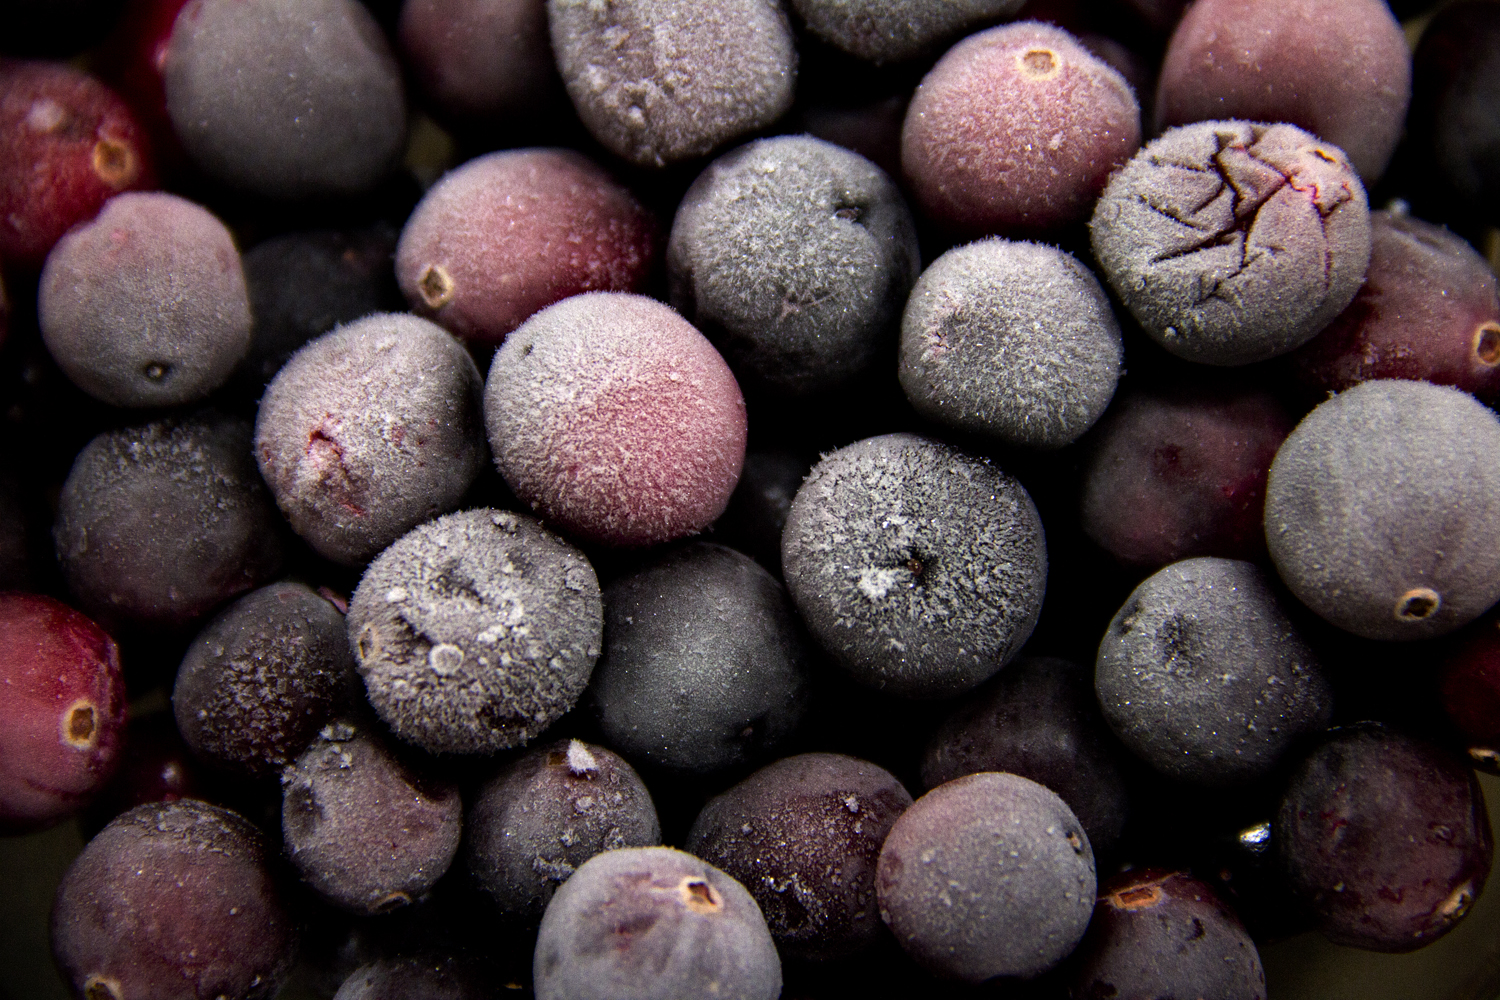 When extracting juice from cranberries, the frozen variety yield more juice because the freezing process breaks down their cellular walls.